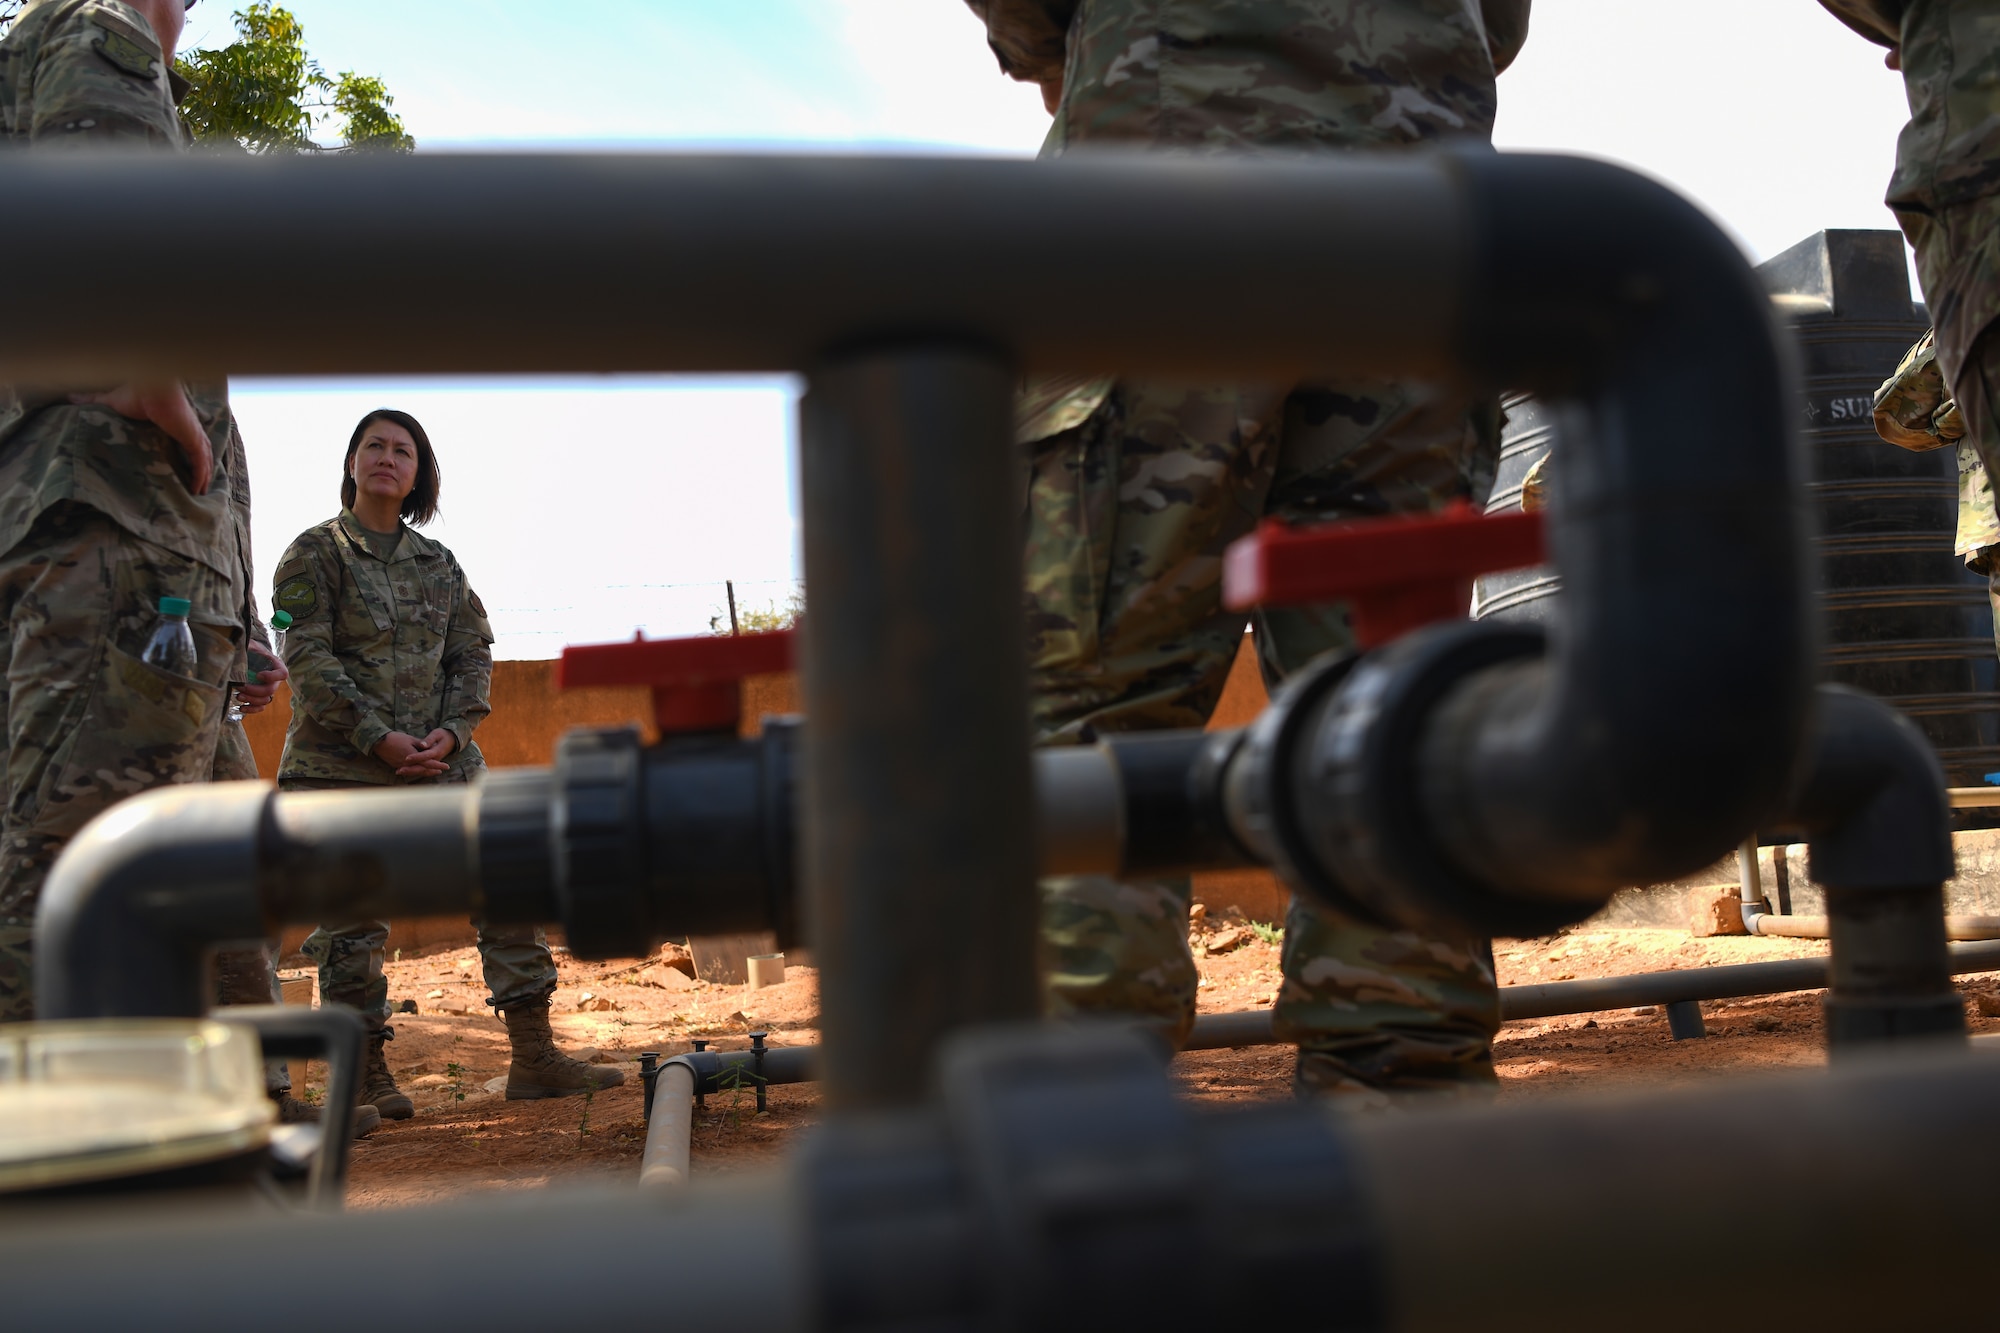 Chief Master Sgt. of the Air Force JoAnne S. Bass talks to Airmen from the 768th Air Expeditionary Base Squadron civil engineering flight (CEF) at Nigerien Air Base 101, Niamey, Dec. 21, 2021. Recently the CEF built a recirculation system for the water stored on the AB 101. The CEF are multi-capable and adaptable team builders, as well as innovative and courageous problem solvers, who demonstrate value in the diversity of thought, ingenuity, and initiative.  (U.S. Air Force photo by Senior Airman Ericka A. Woolever)